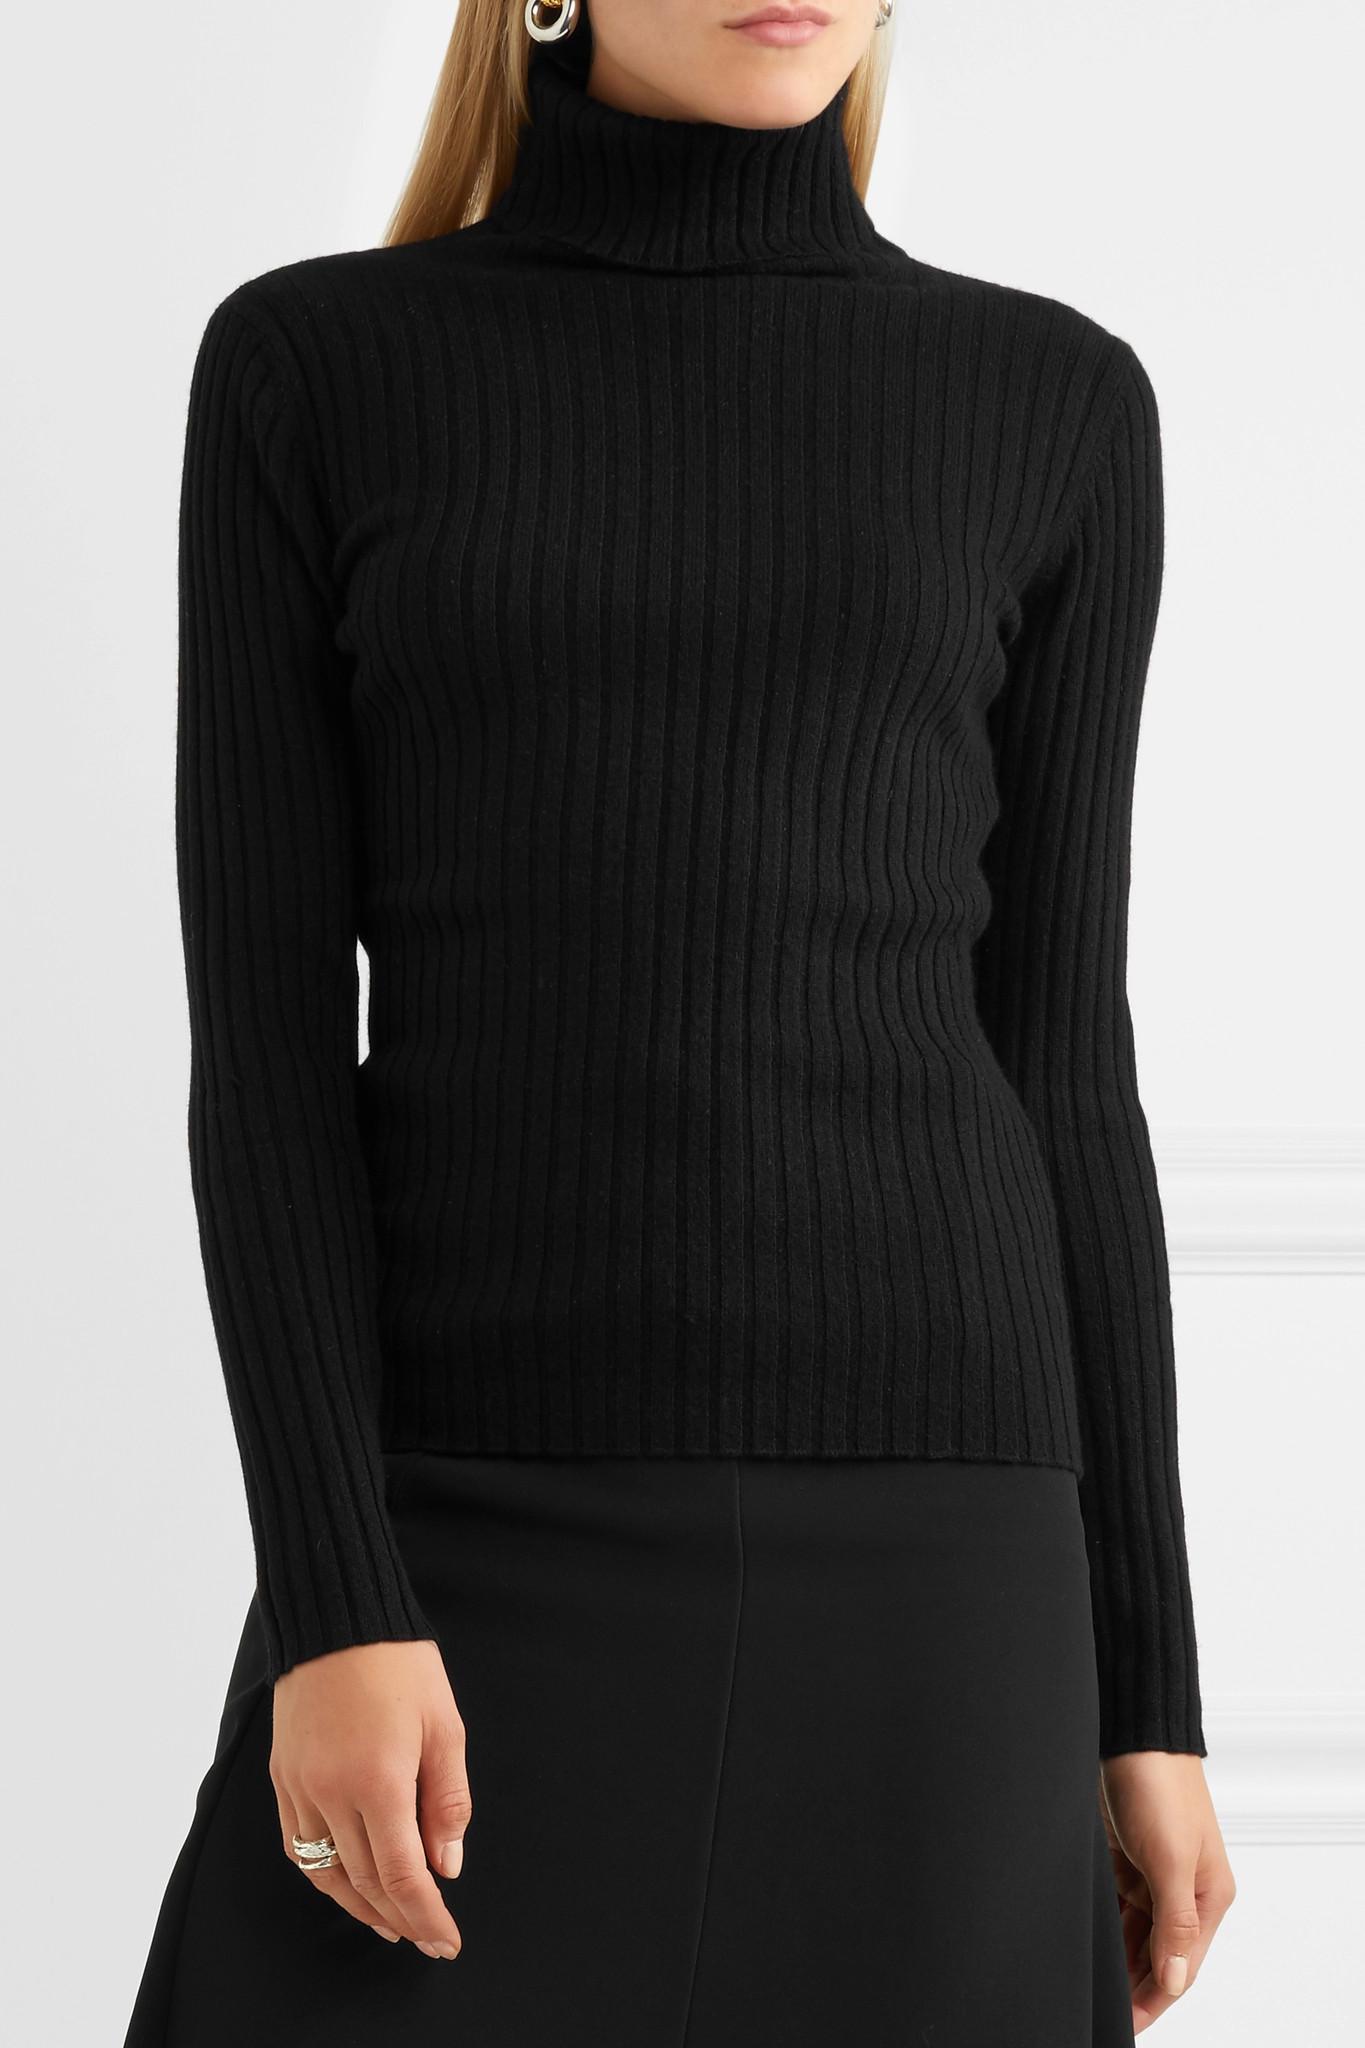 Allude Ribbed Cashmere Turtleneck Sweater in Black - Lyst